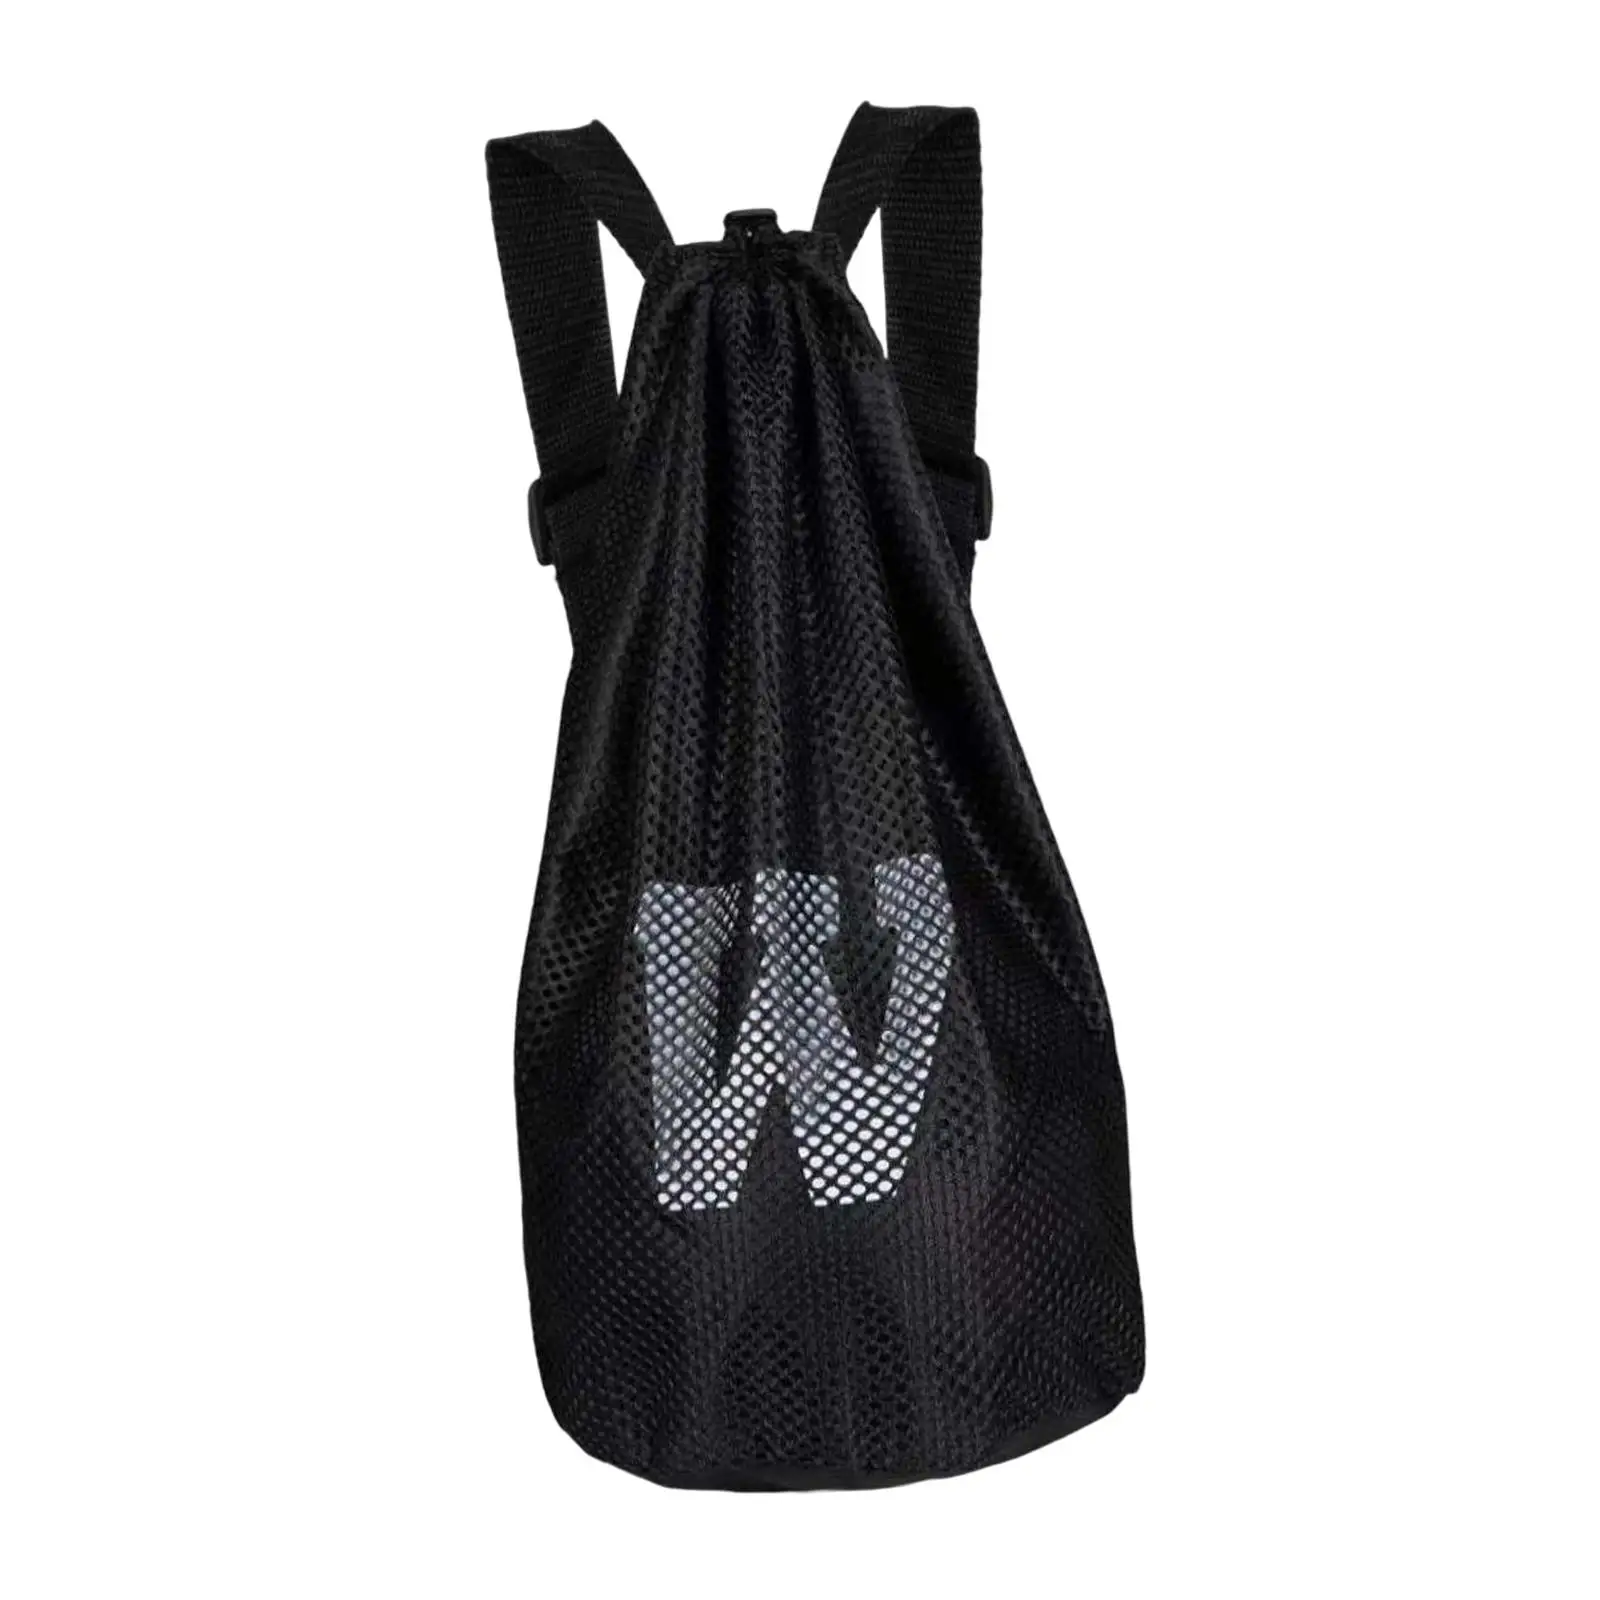 Sports Gym Bag Durable with Adjustable Shoulder Strap Fashion Portable Mesh Backpack for Training Shoes Football Beach